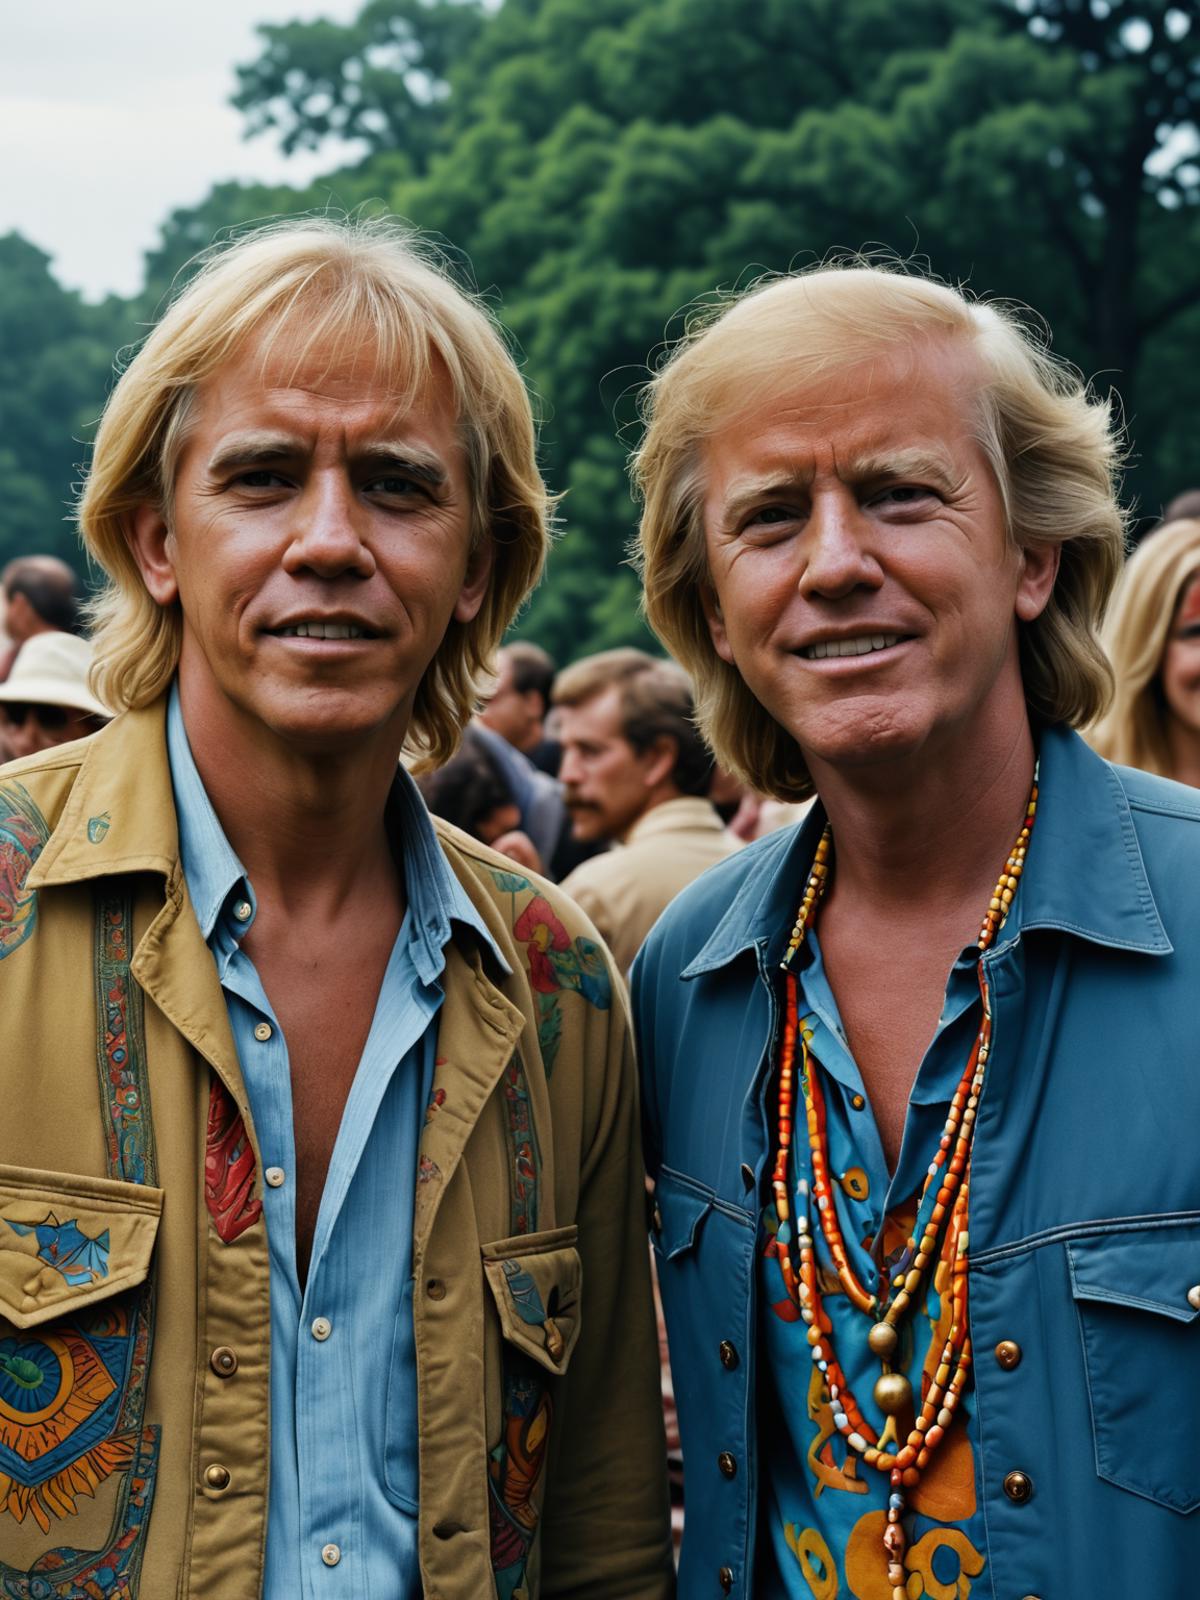 Two men with blonde hair and blue shirts posing together for a picture.